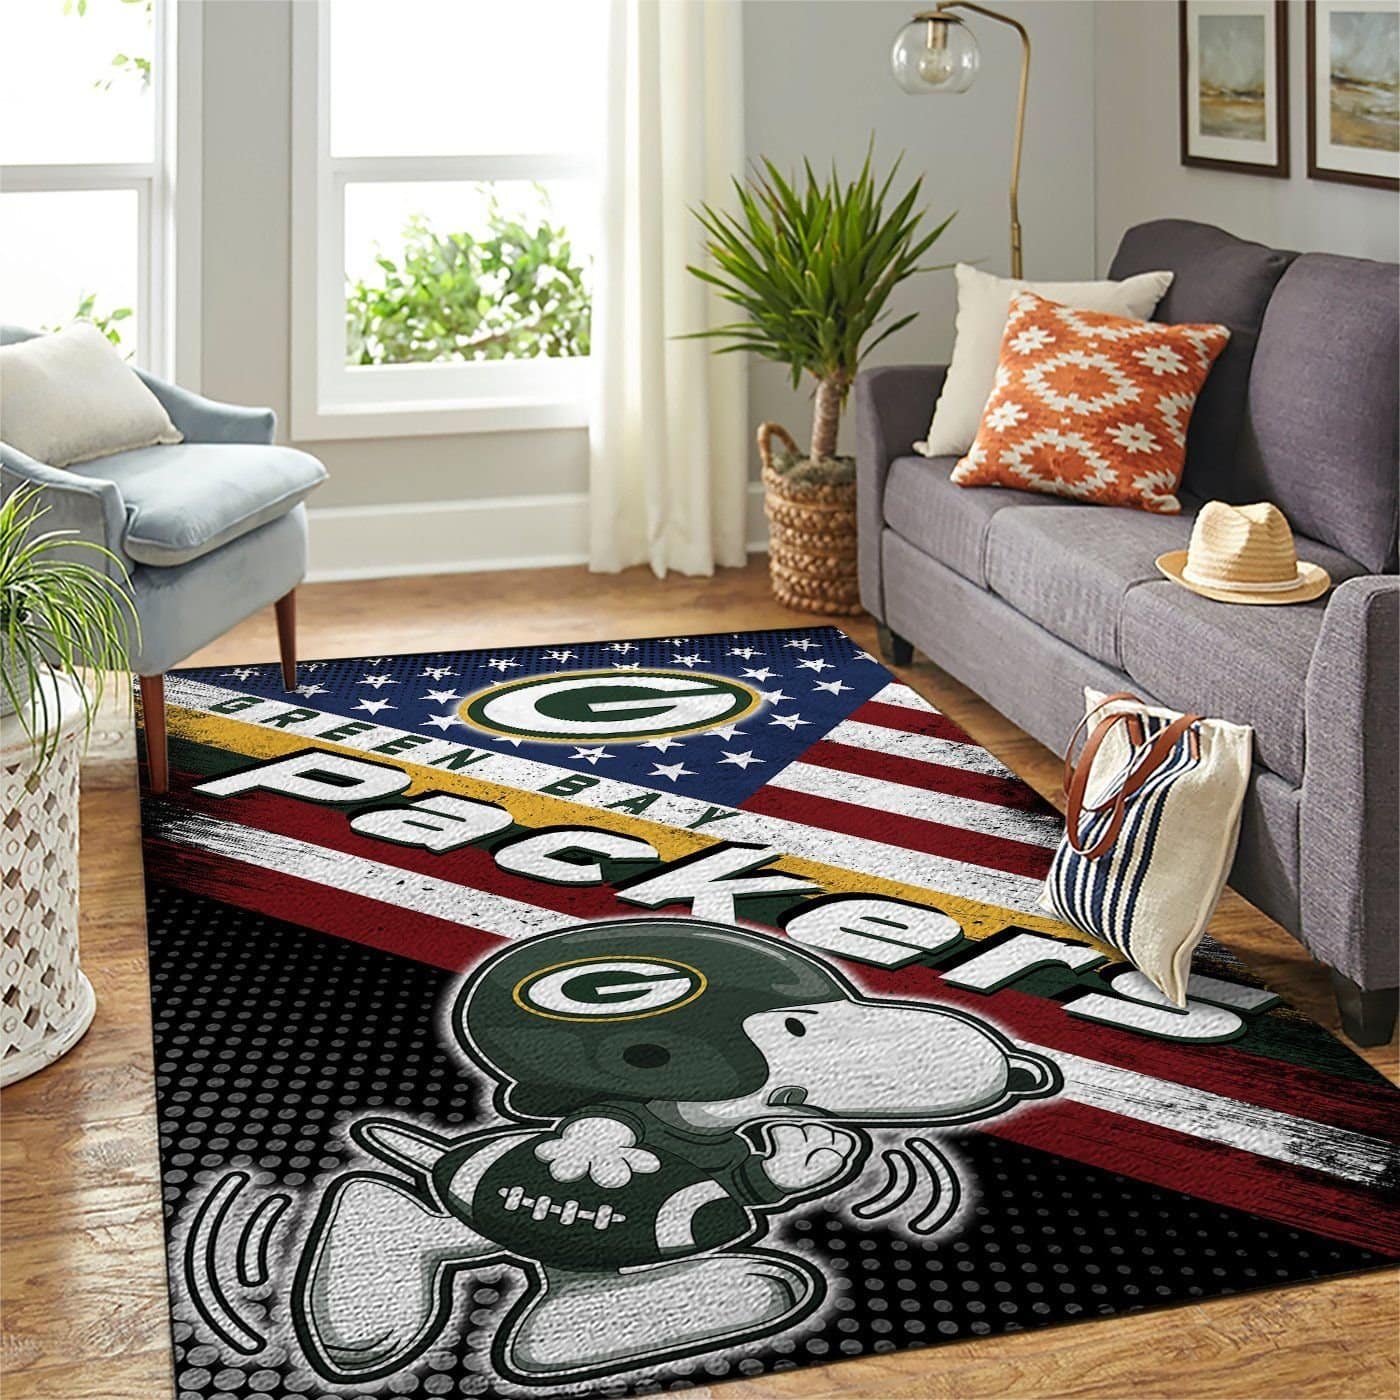 Amazon Green Bay Packers Living Room Area No3123 Rug